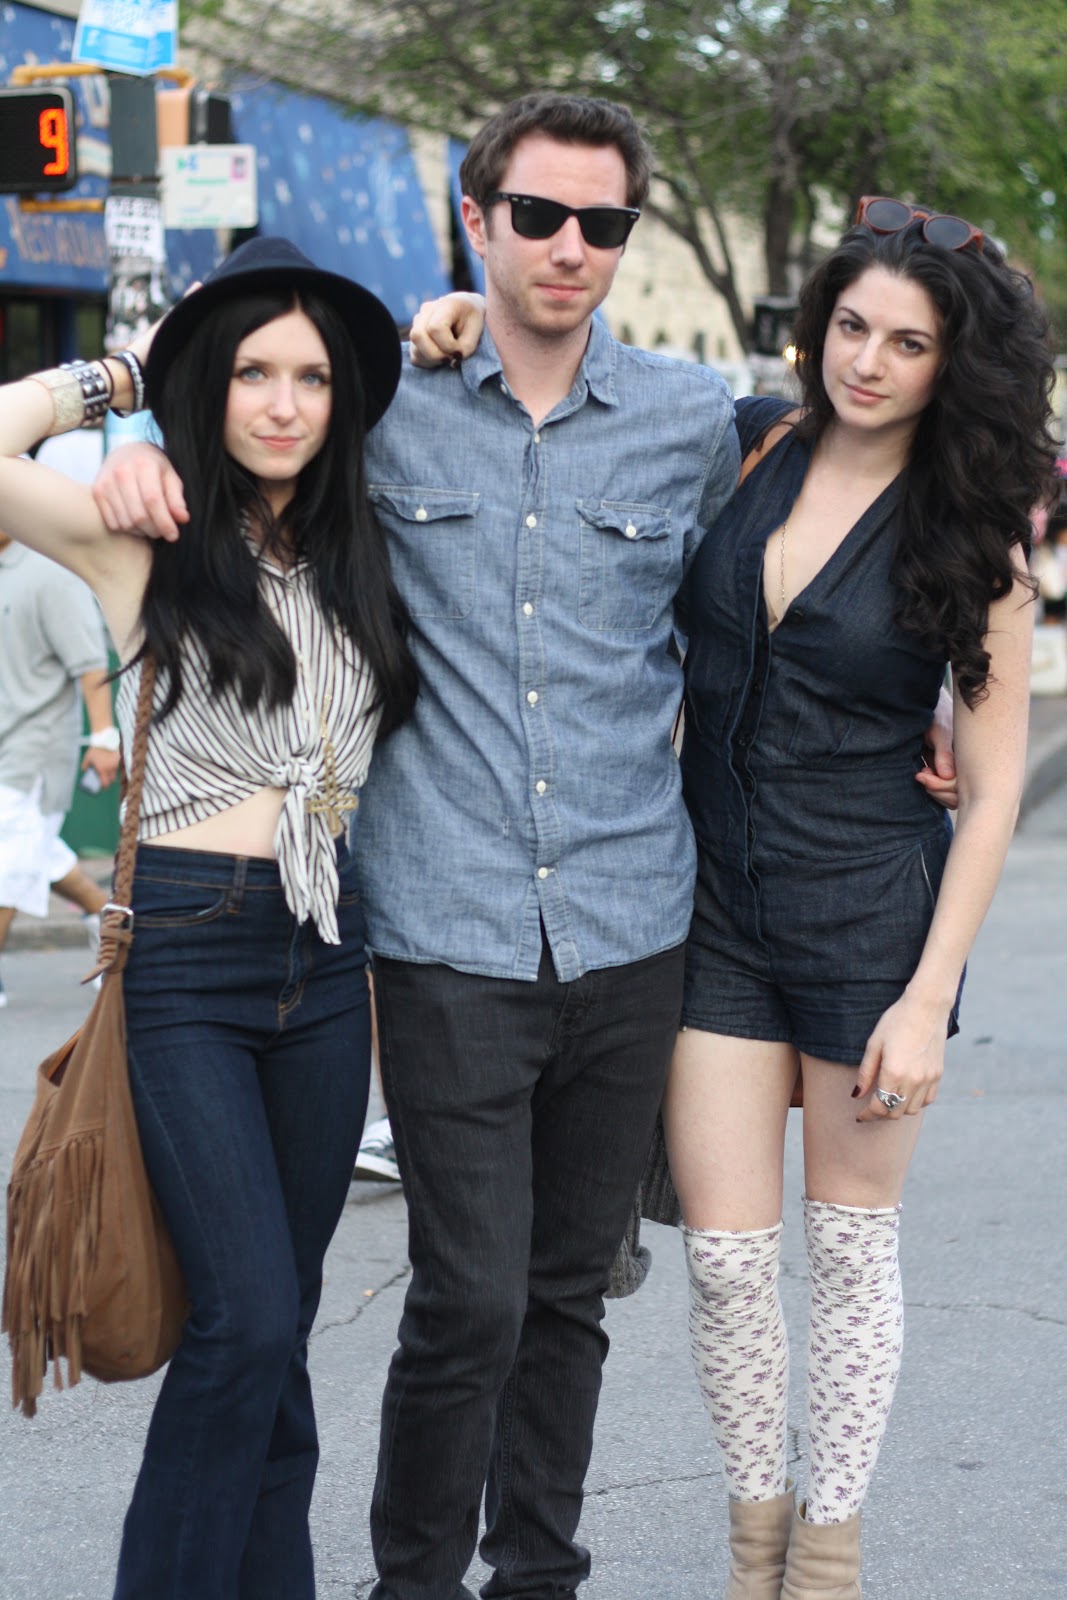 group of three friends at sxsw music festival